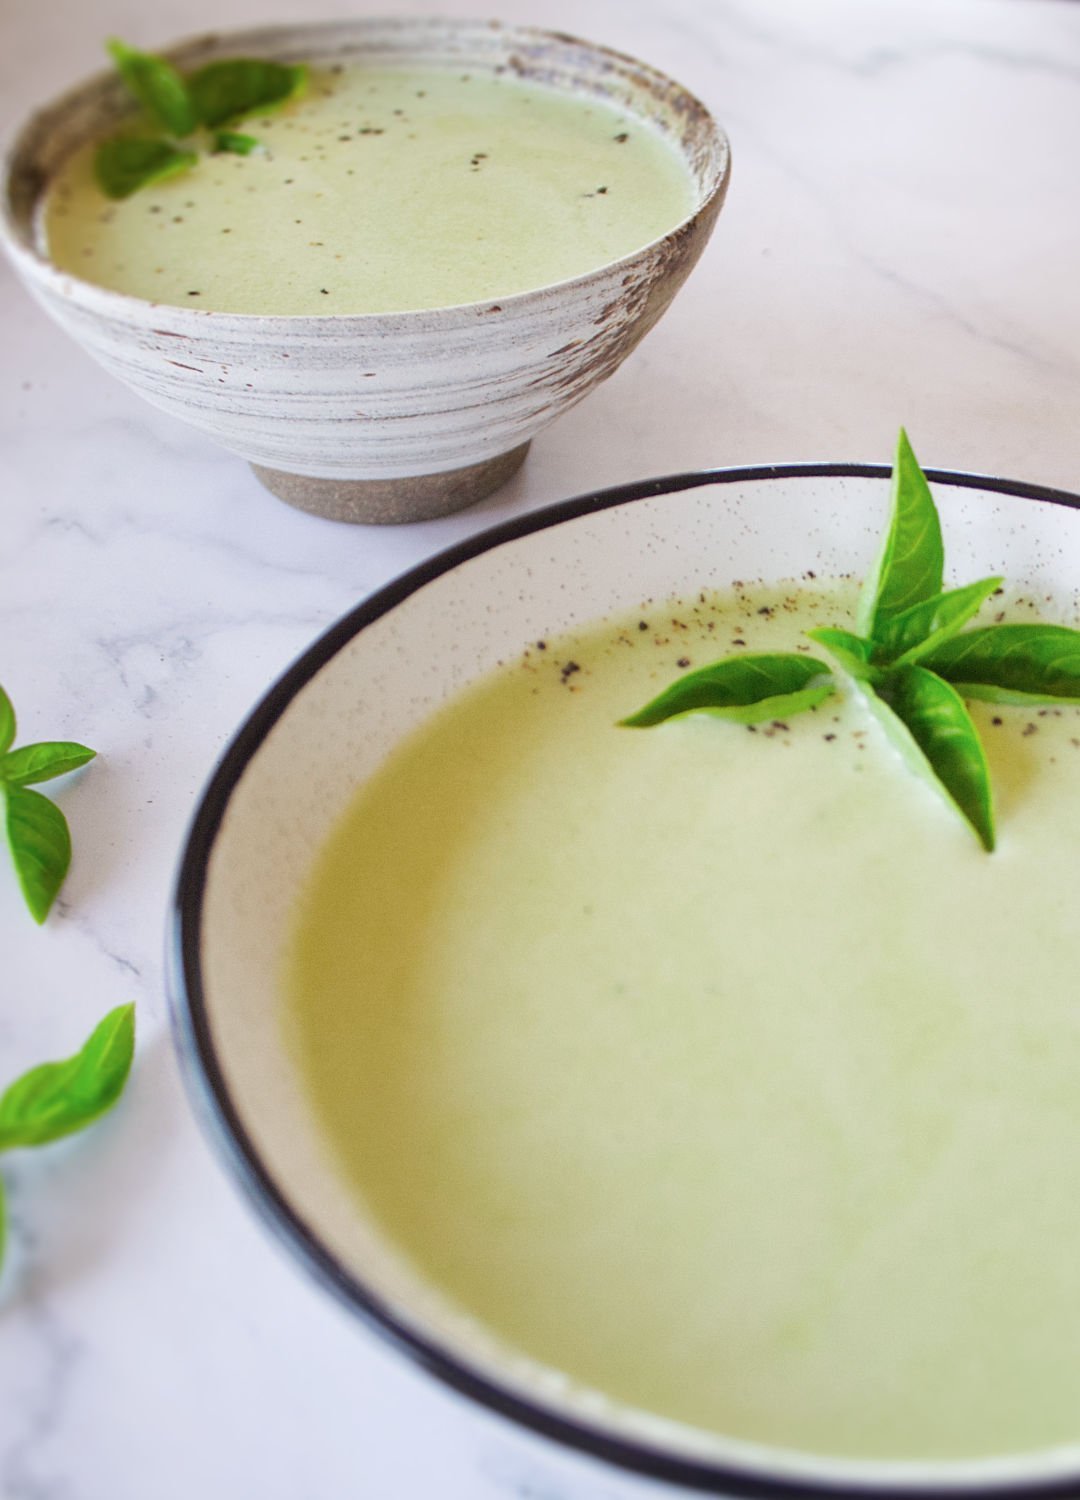 2 bowls sit filled with cold cucumber soup and garnished with some fresh basil